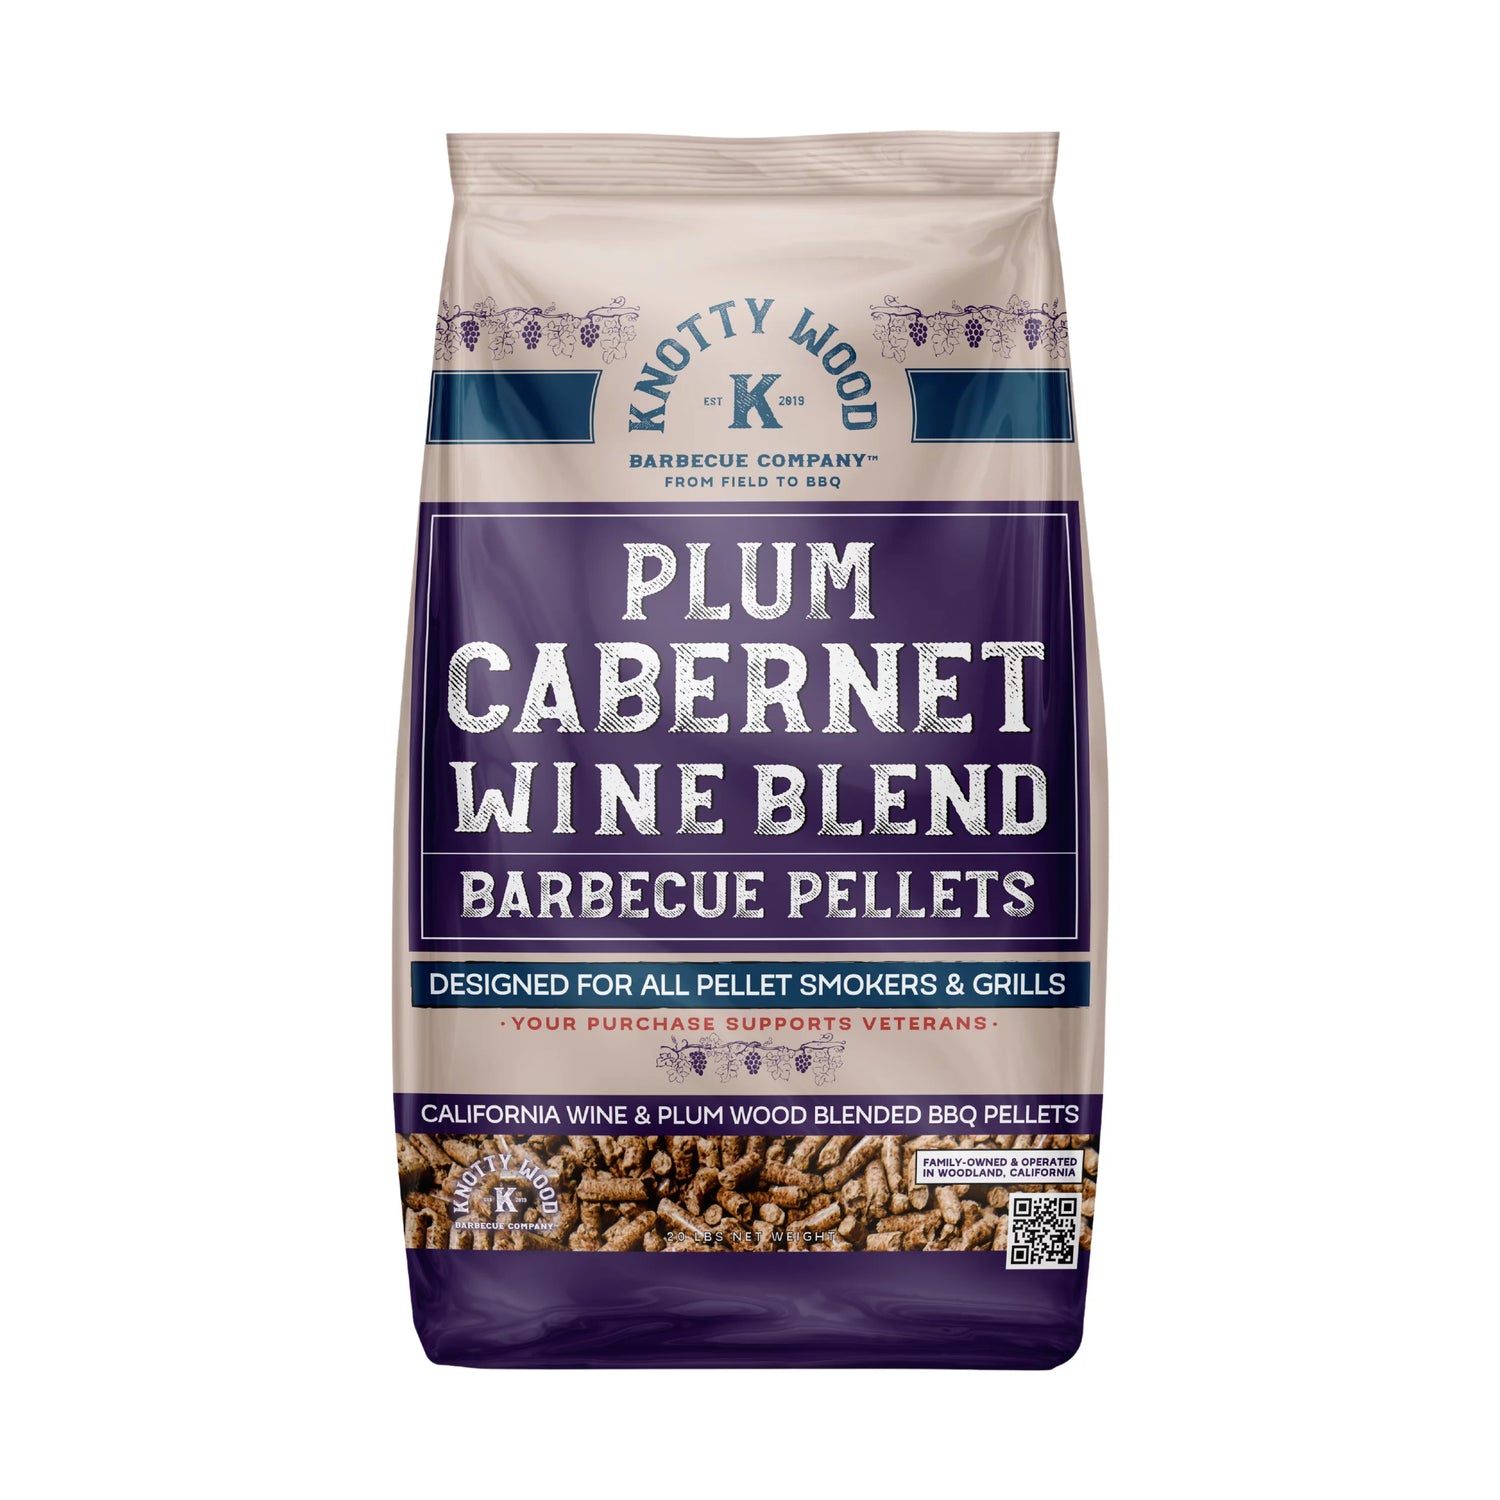 2 Pack: Plum Cabernet & Almond Cabernet Wood Barbecue Pellets by Knotty Wood (2 x 20lb)